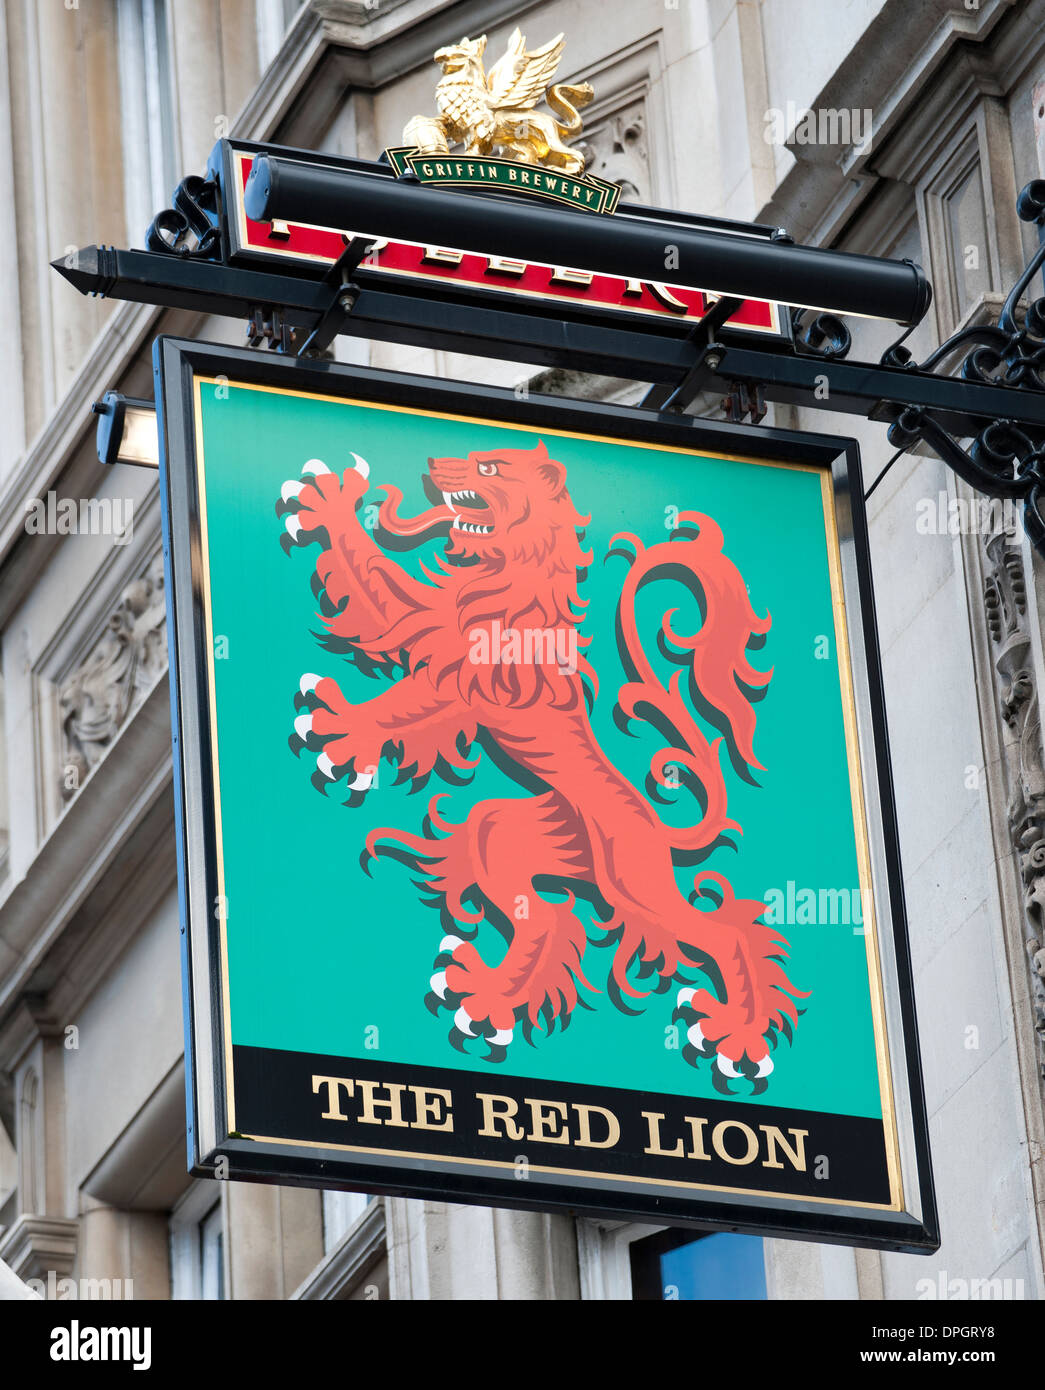 The Red Lion Public House, 48 Parliament Street, London, England, UK. Stock Photo